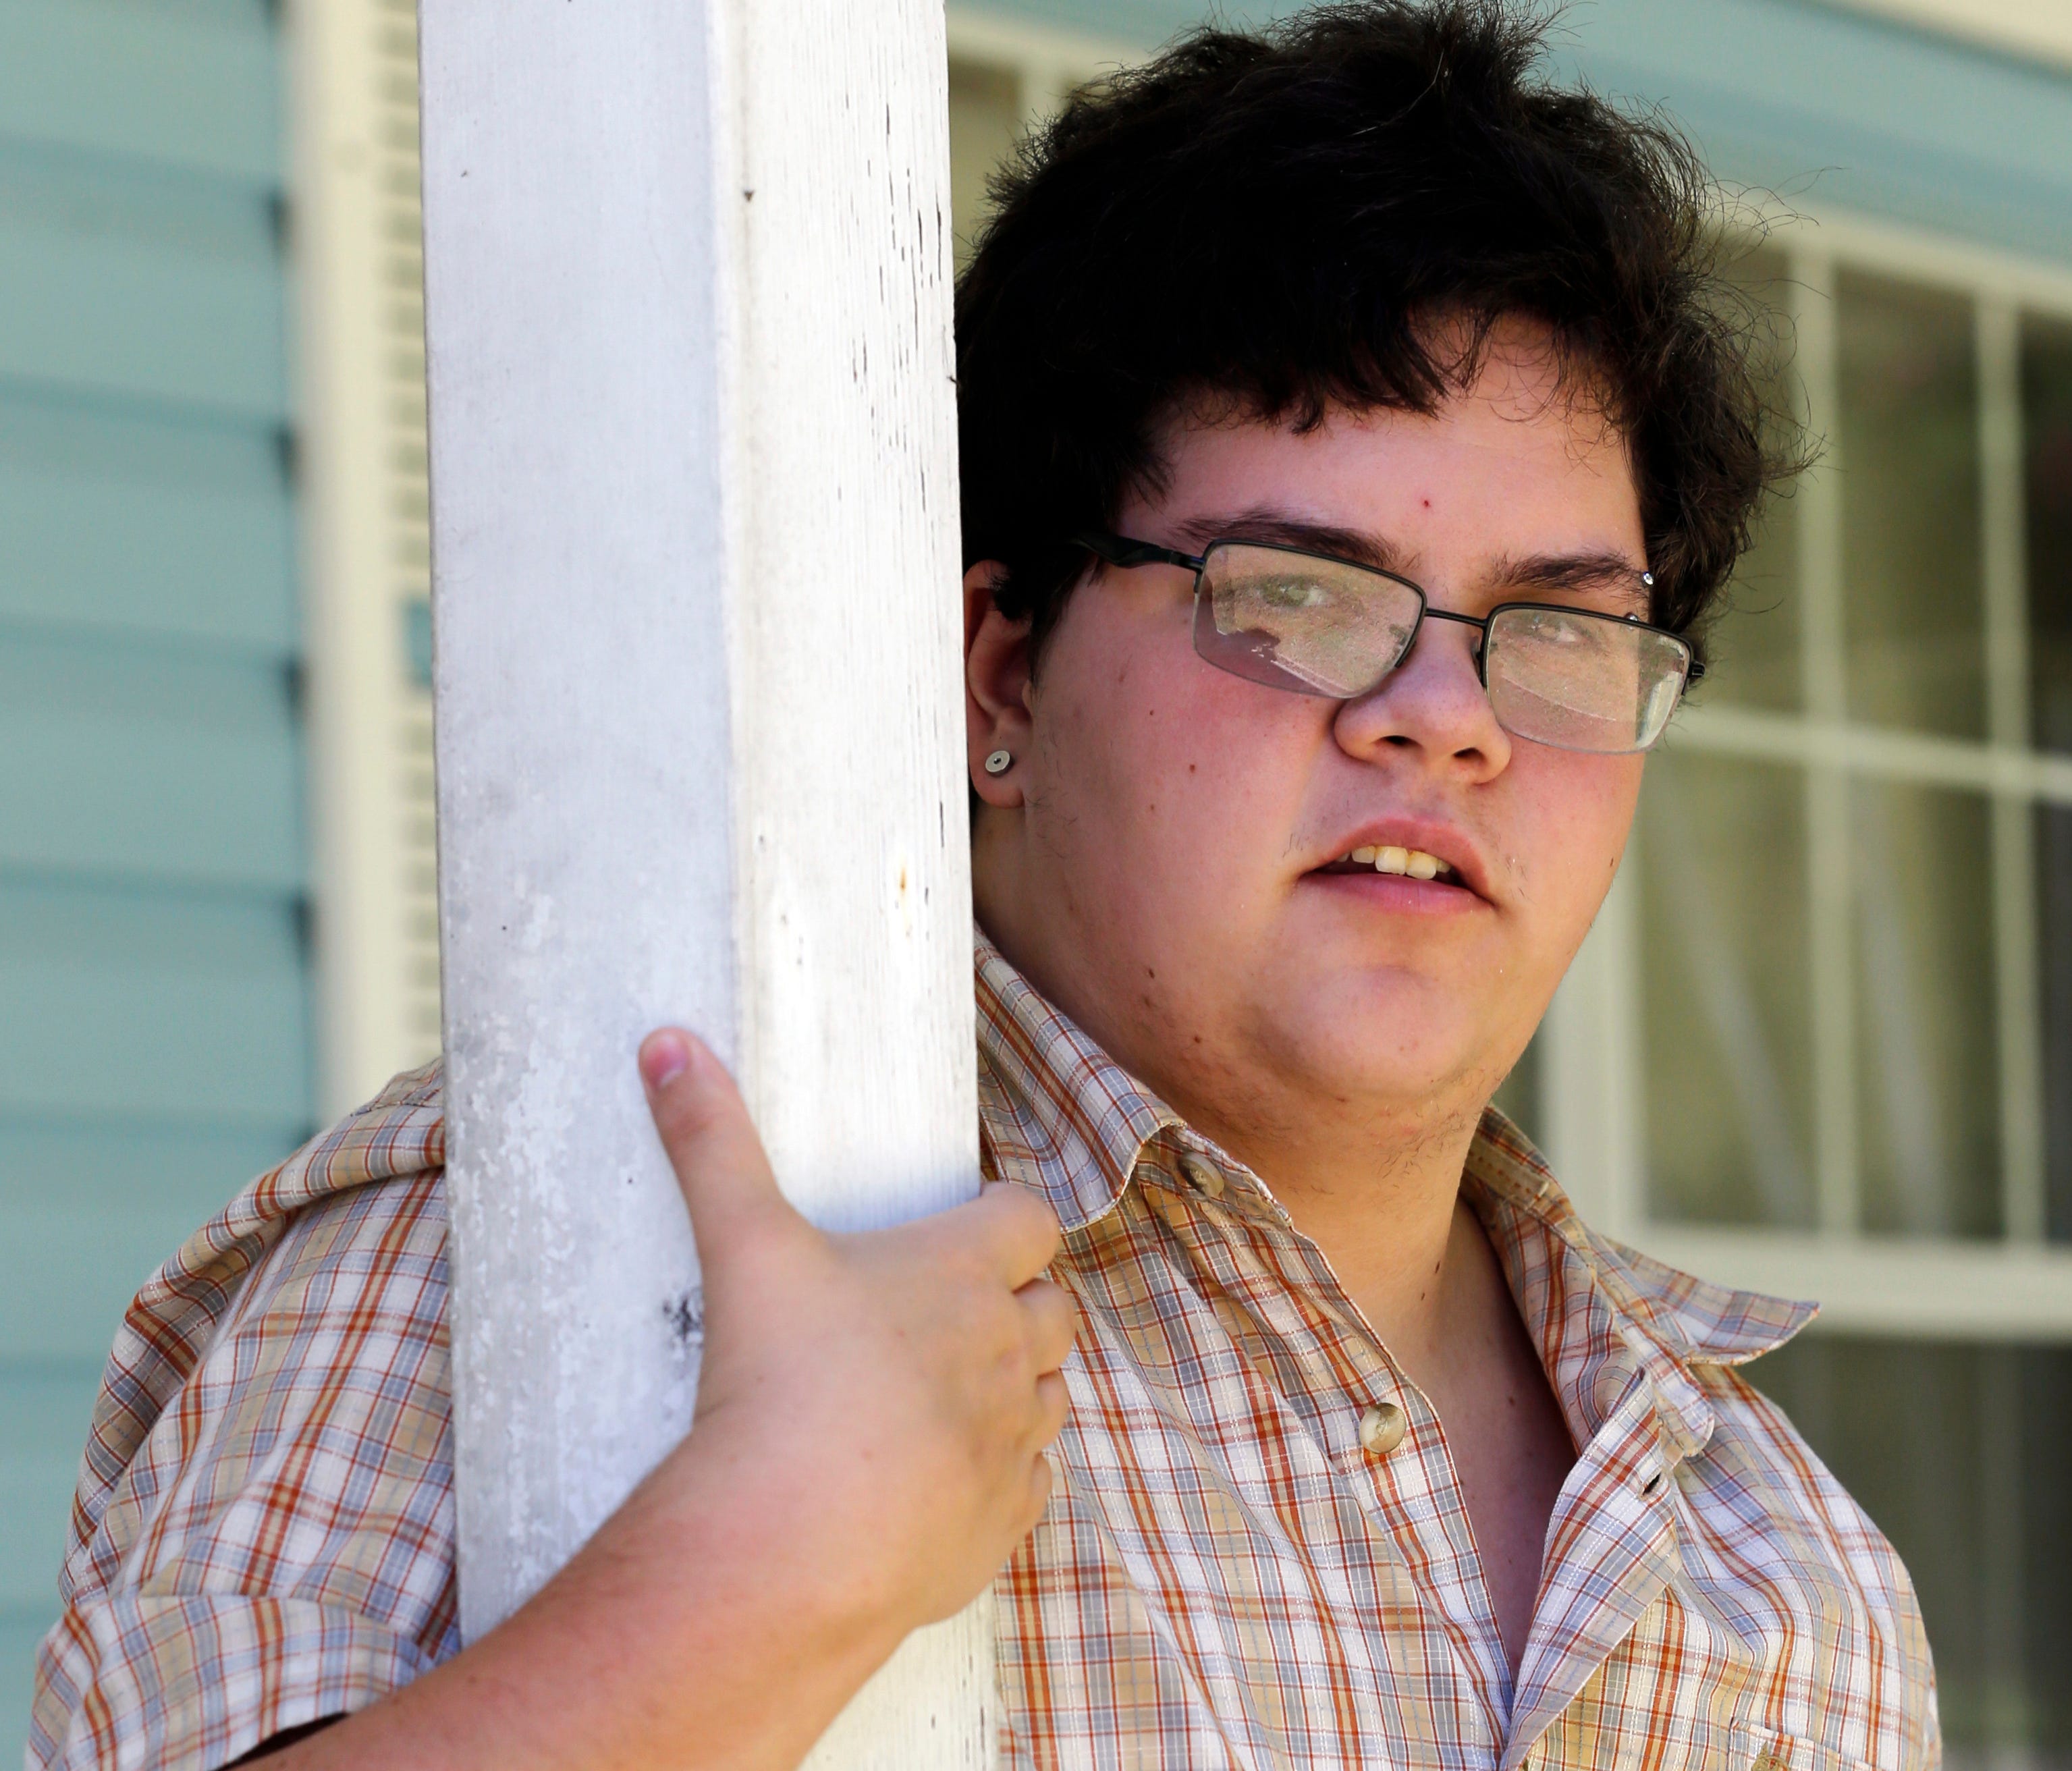 In this Monday, Aug. 22, 2016 photo, transgender high school student Gavin Grimm poses in Gloucester, Va. Grimm, who was born female but identifies as male, heads back to Gloucester High School for his senior year as the U.S. Supreme Court considers 